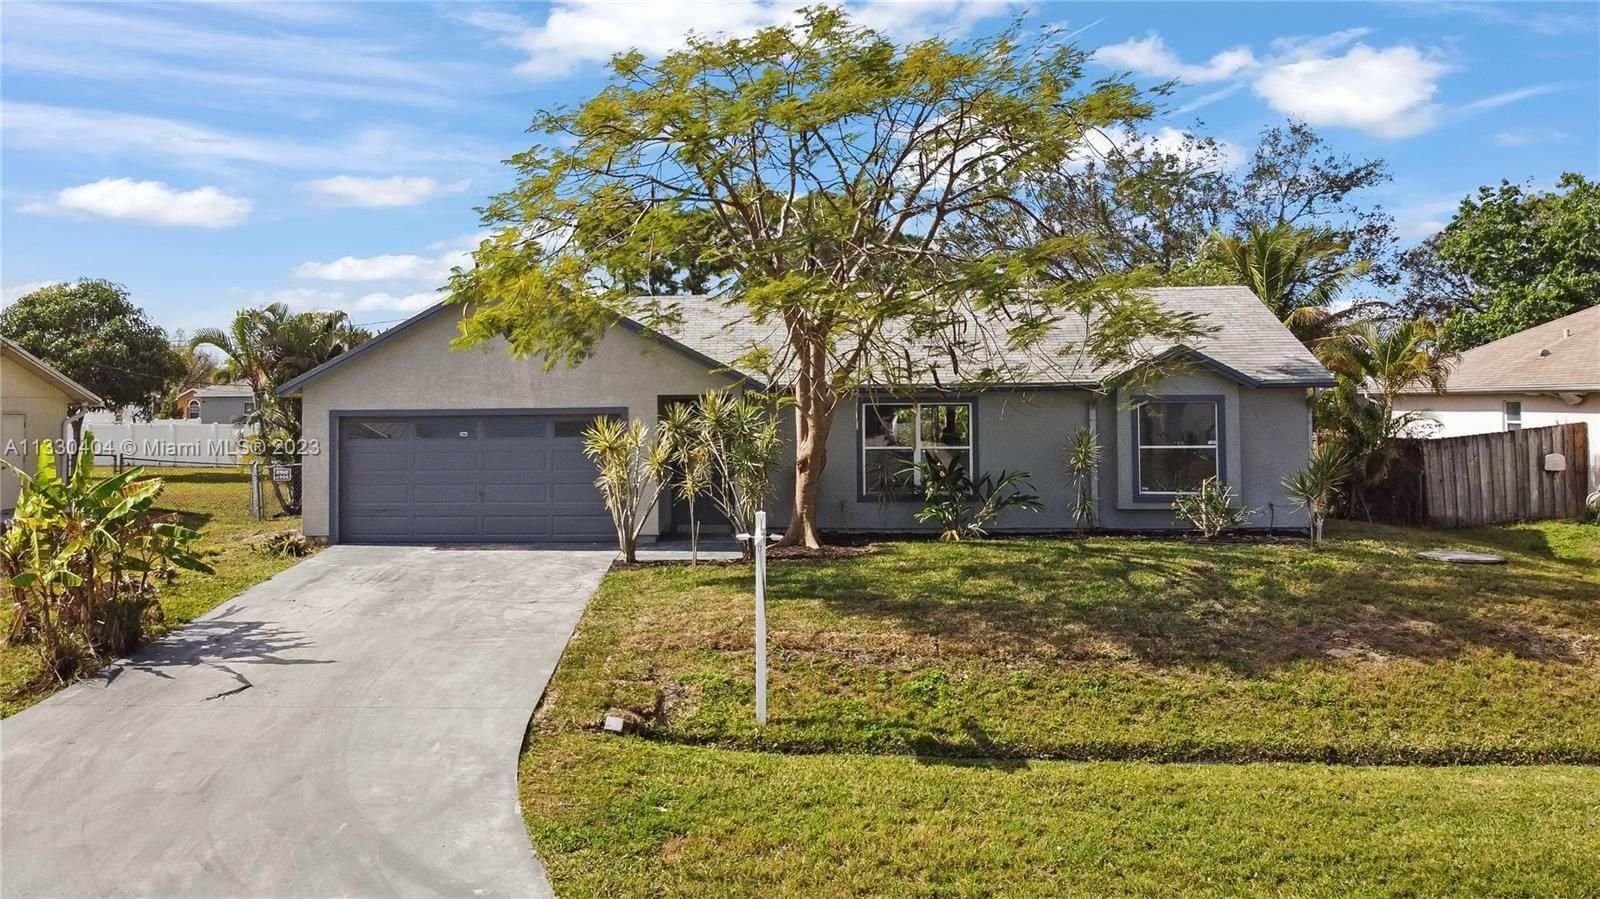 Real estate property located at 1642 Angelico Ln, St Lucie County, Port St. Lucie, FL